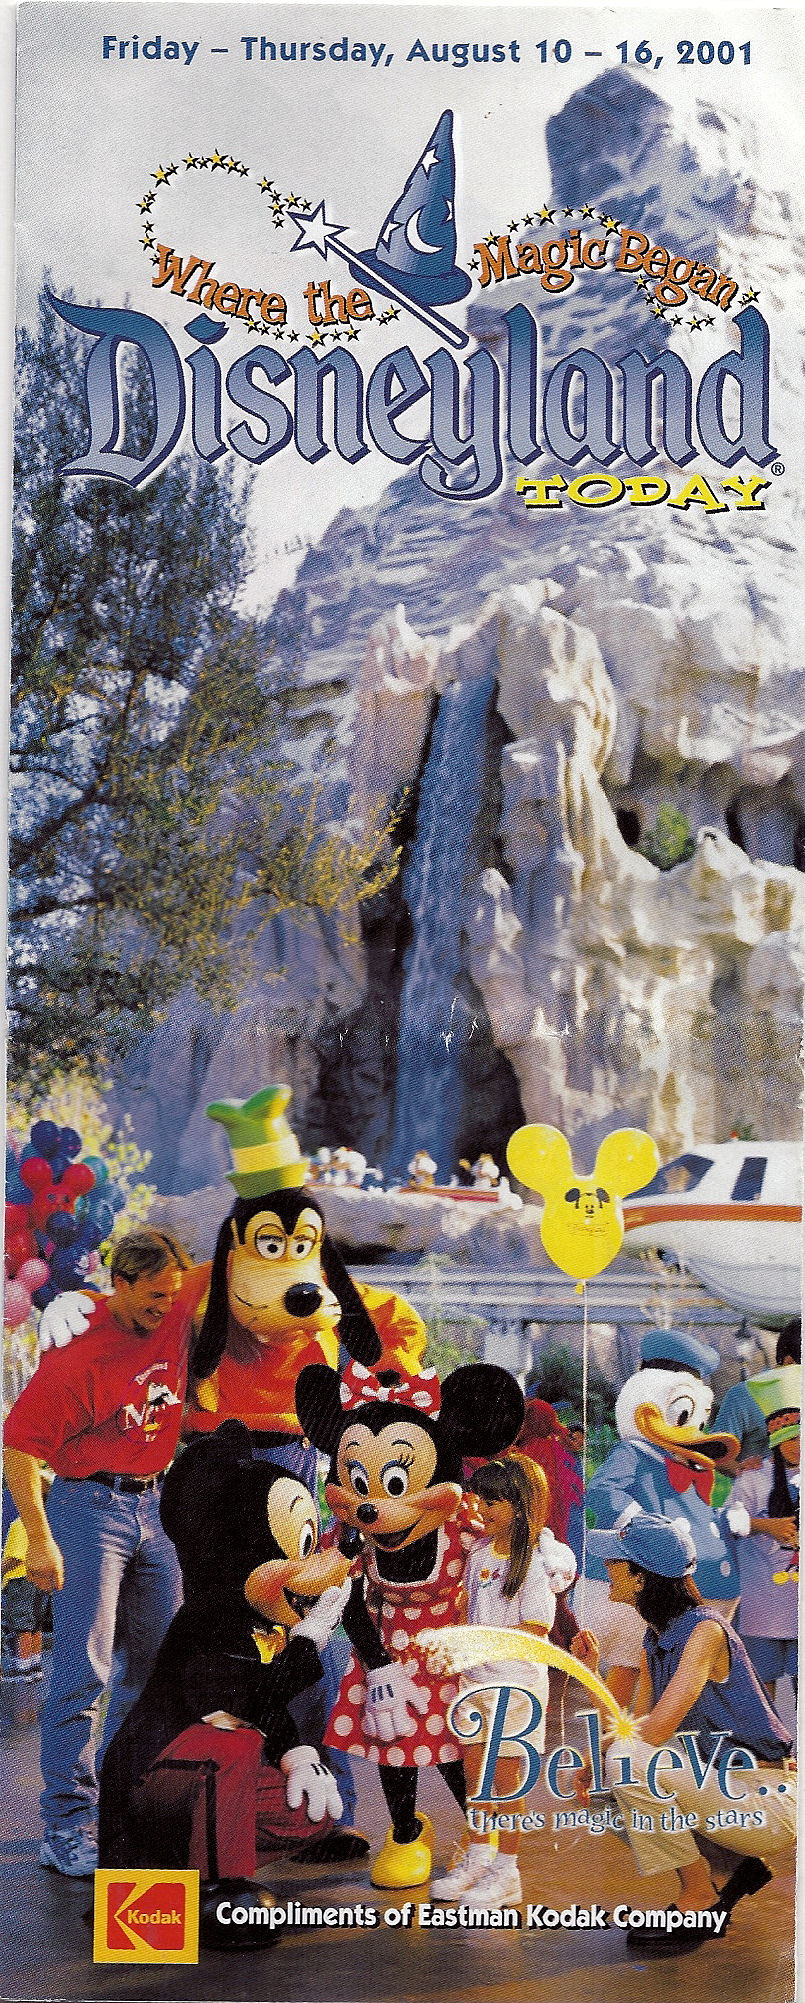 The cover of a map of Disneyland.